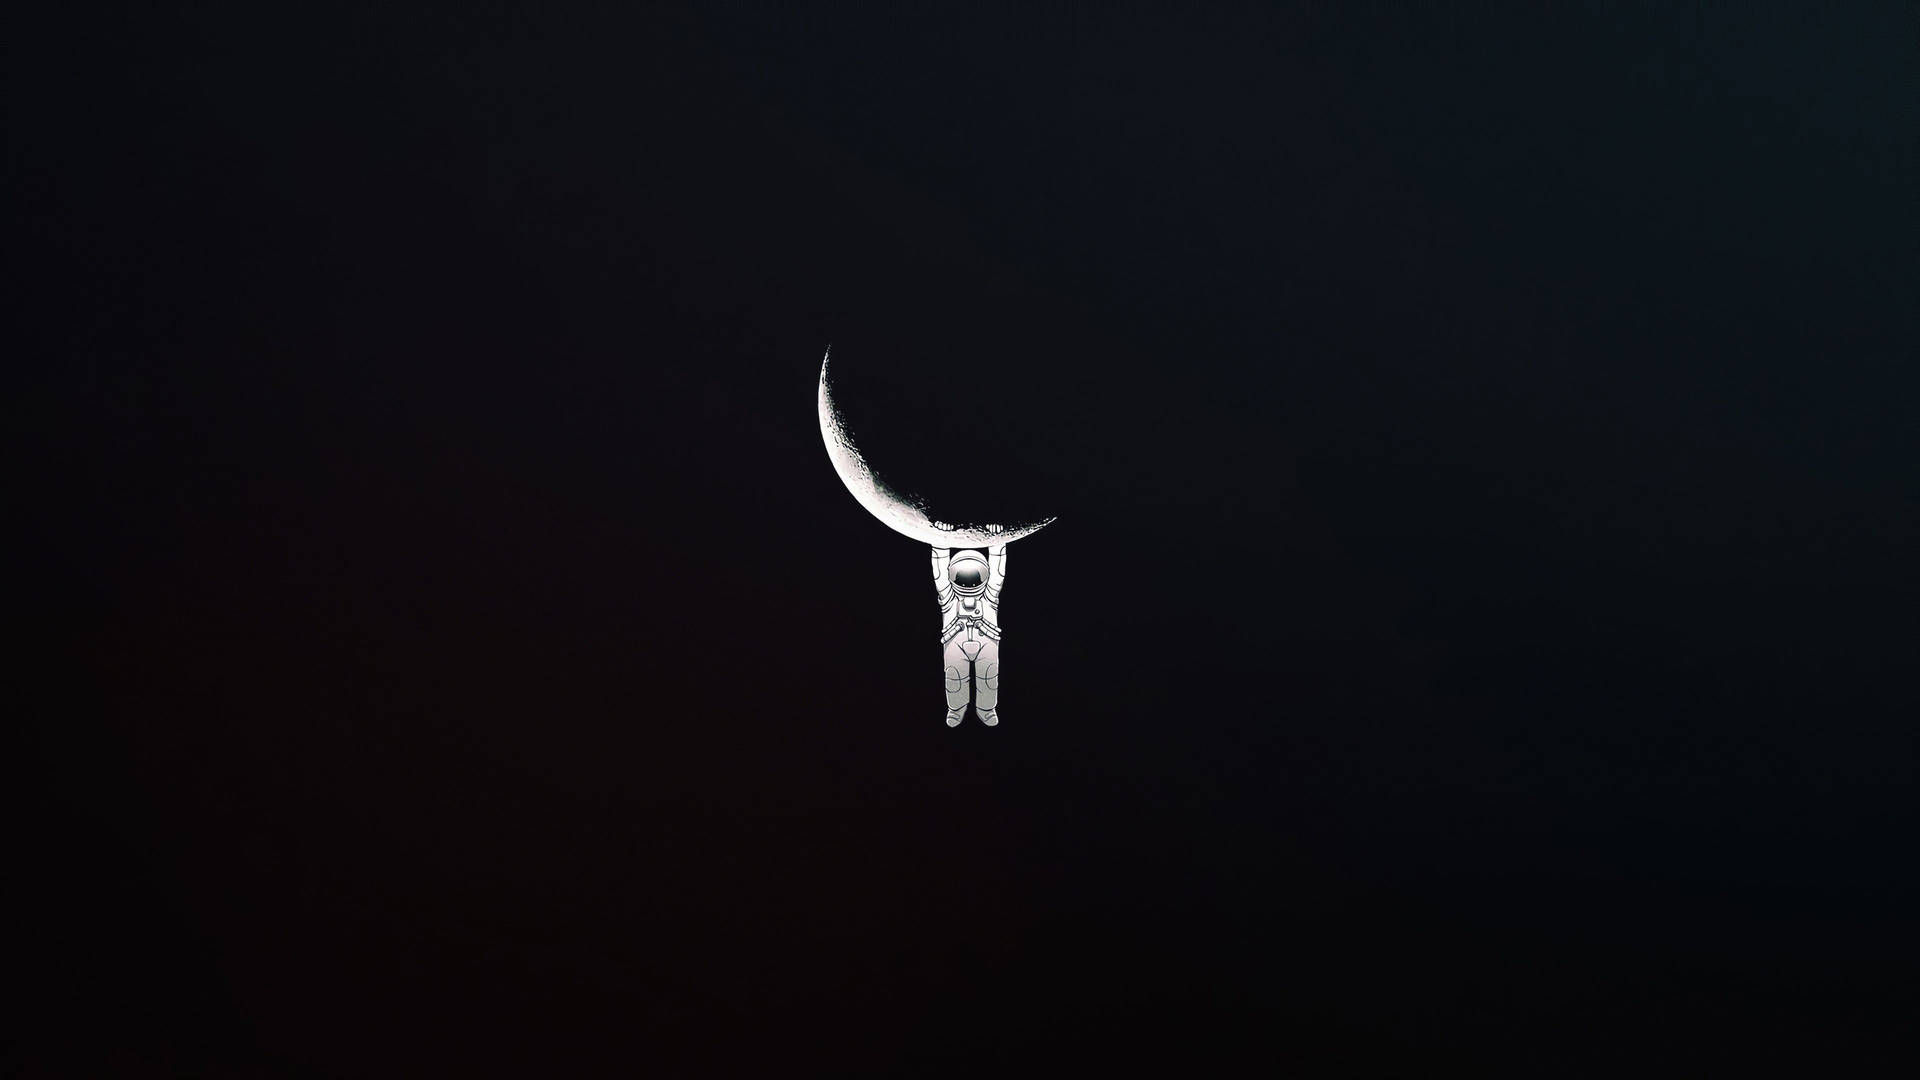 Astronaut Aesthetic Hanging On Crescent Moon Background